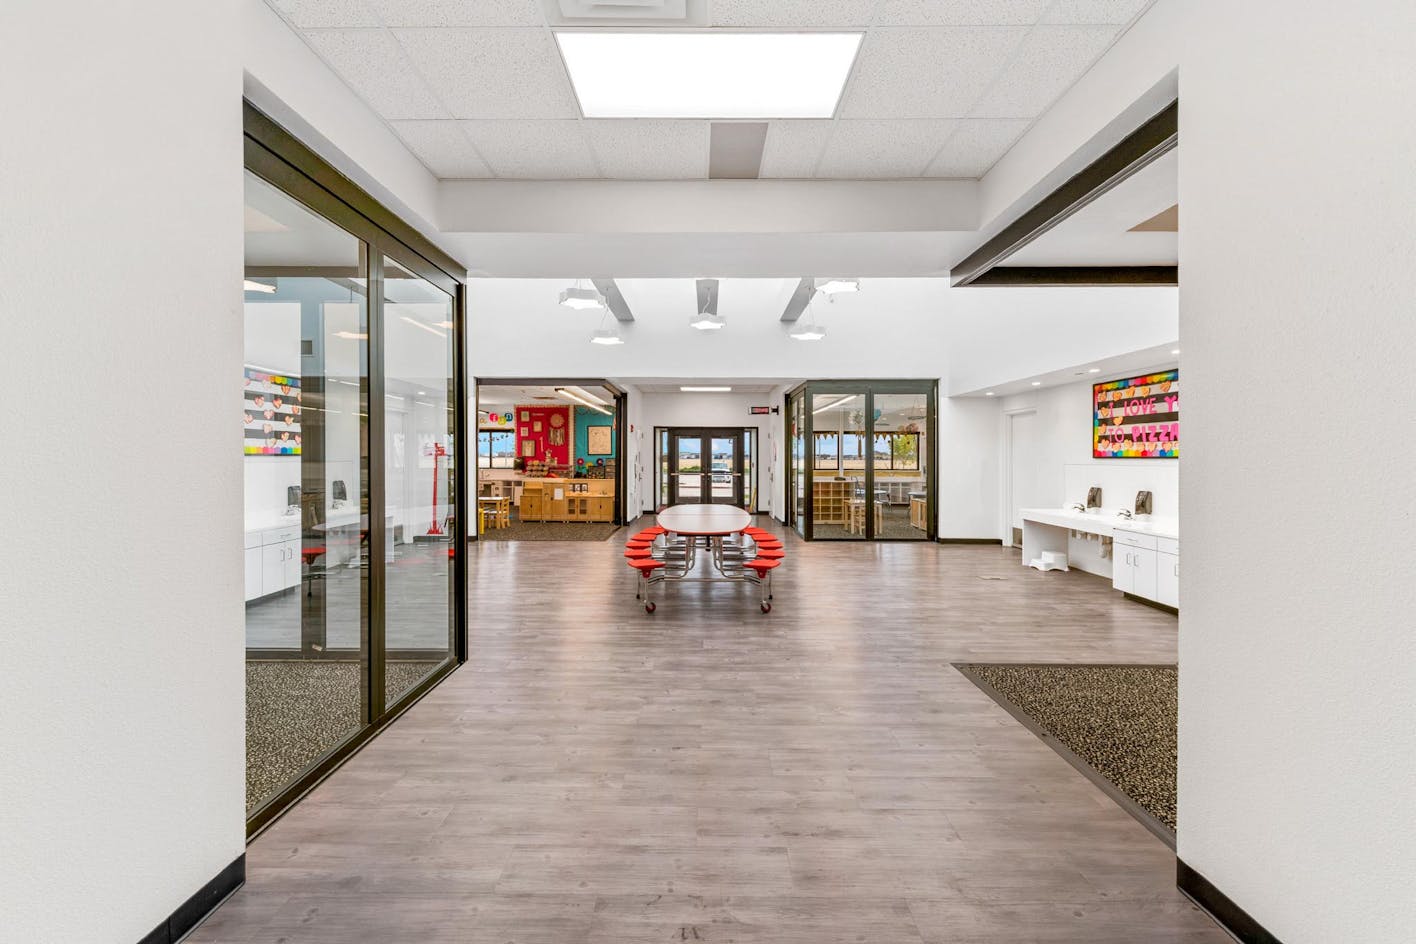 learning hub design with sliding glass walls